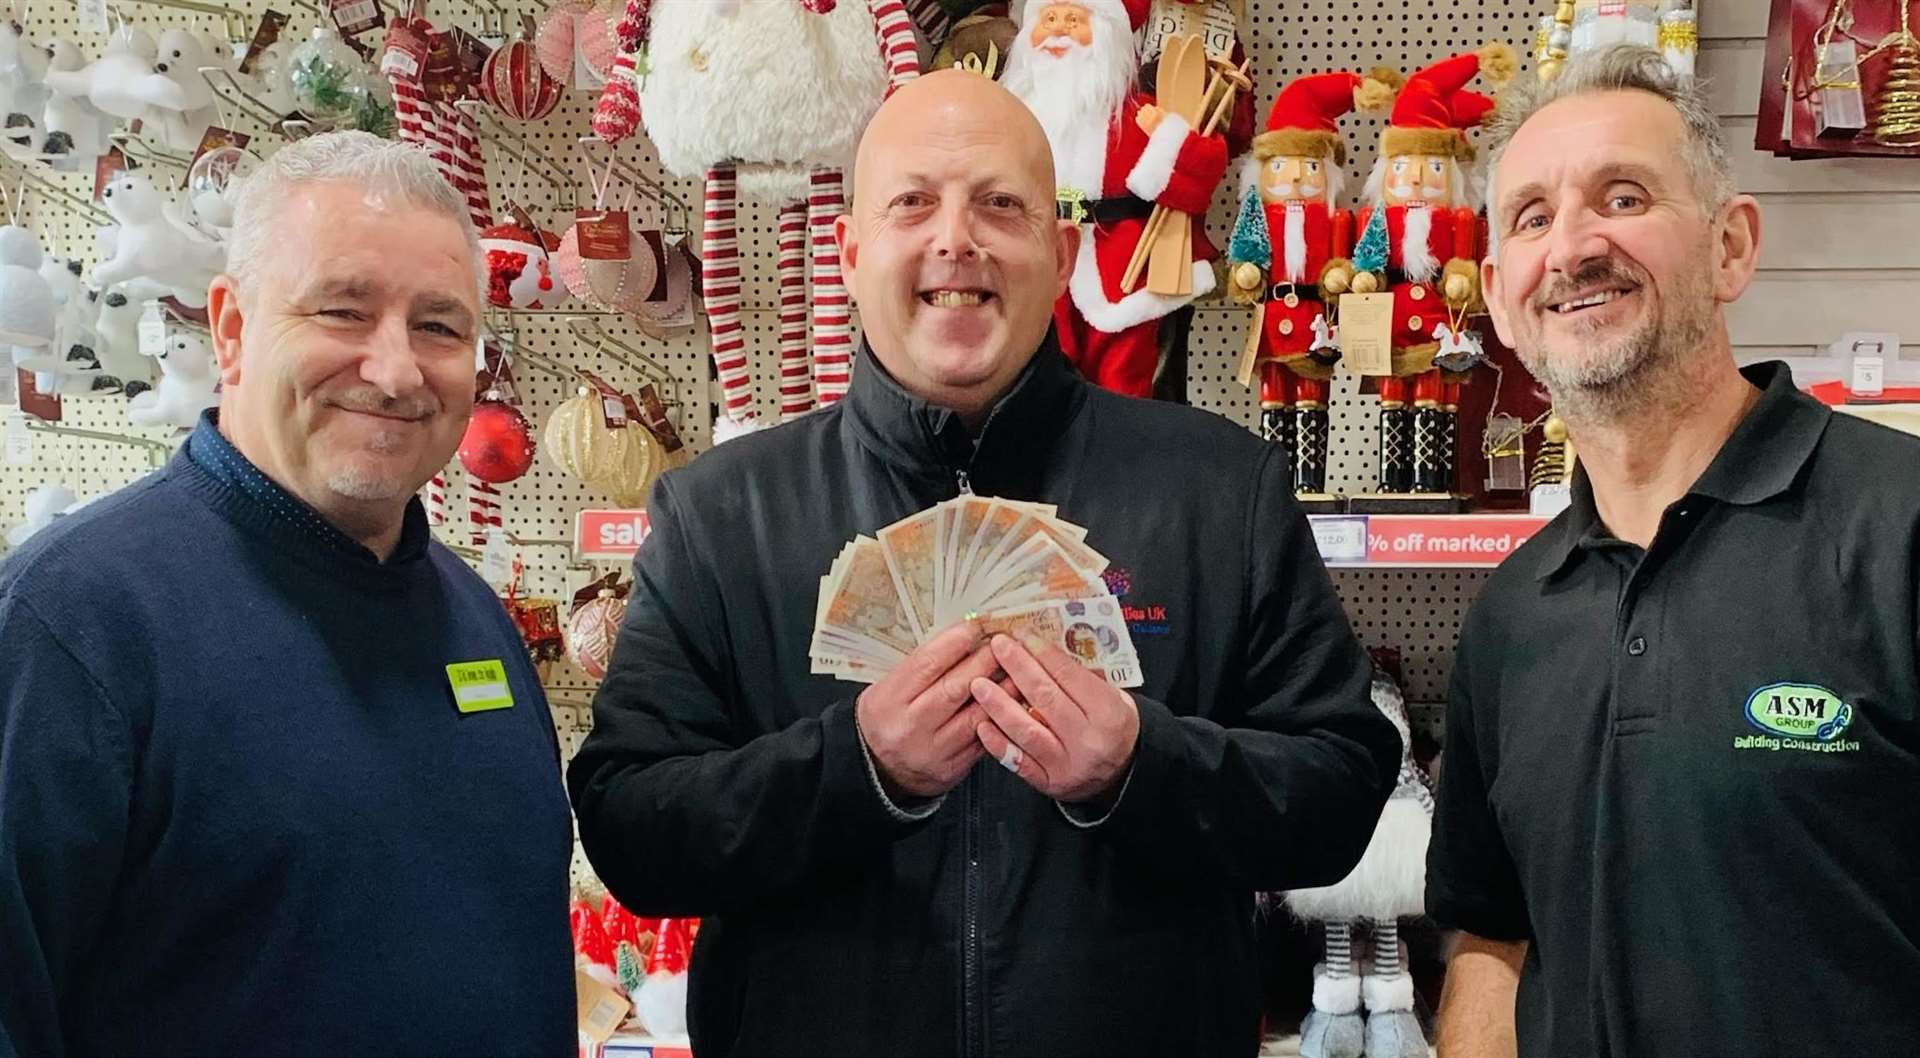 The handing over of one of the biggest donations after the theft. From left: Wayne Richardson, Luke Shaw of United Families, and Andrew Morley. Picture: The Original Factory Shop